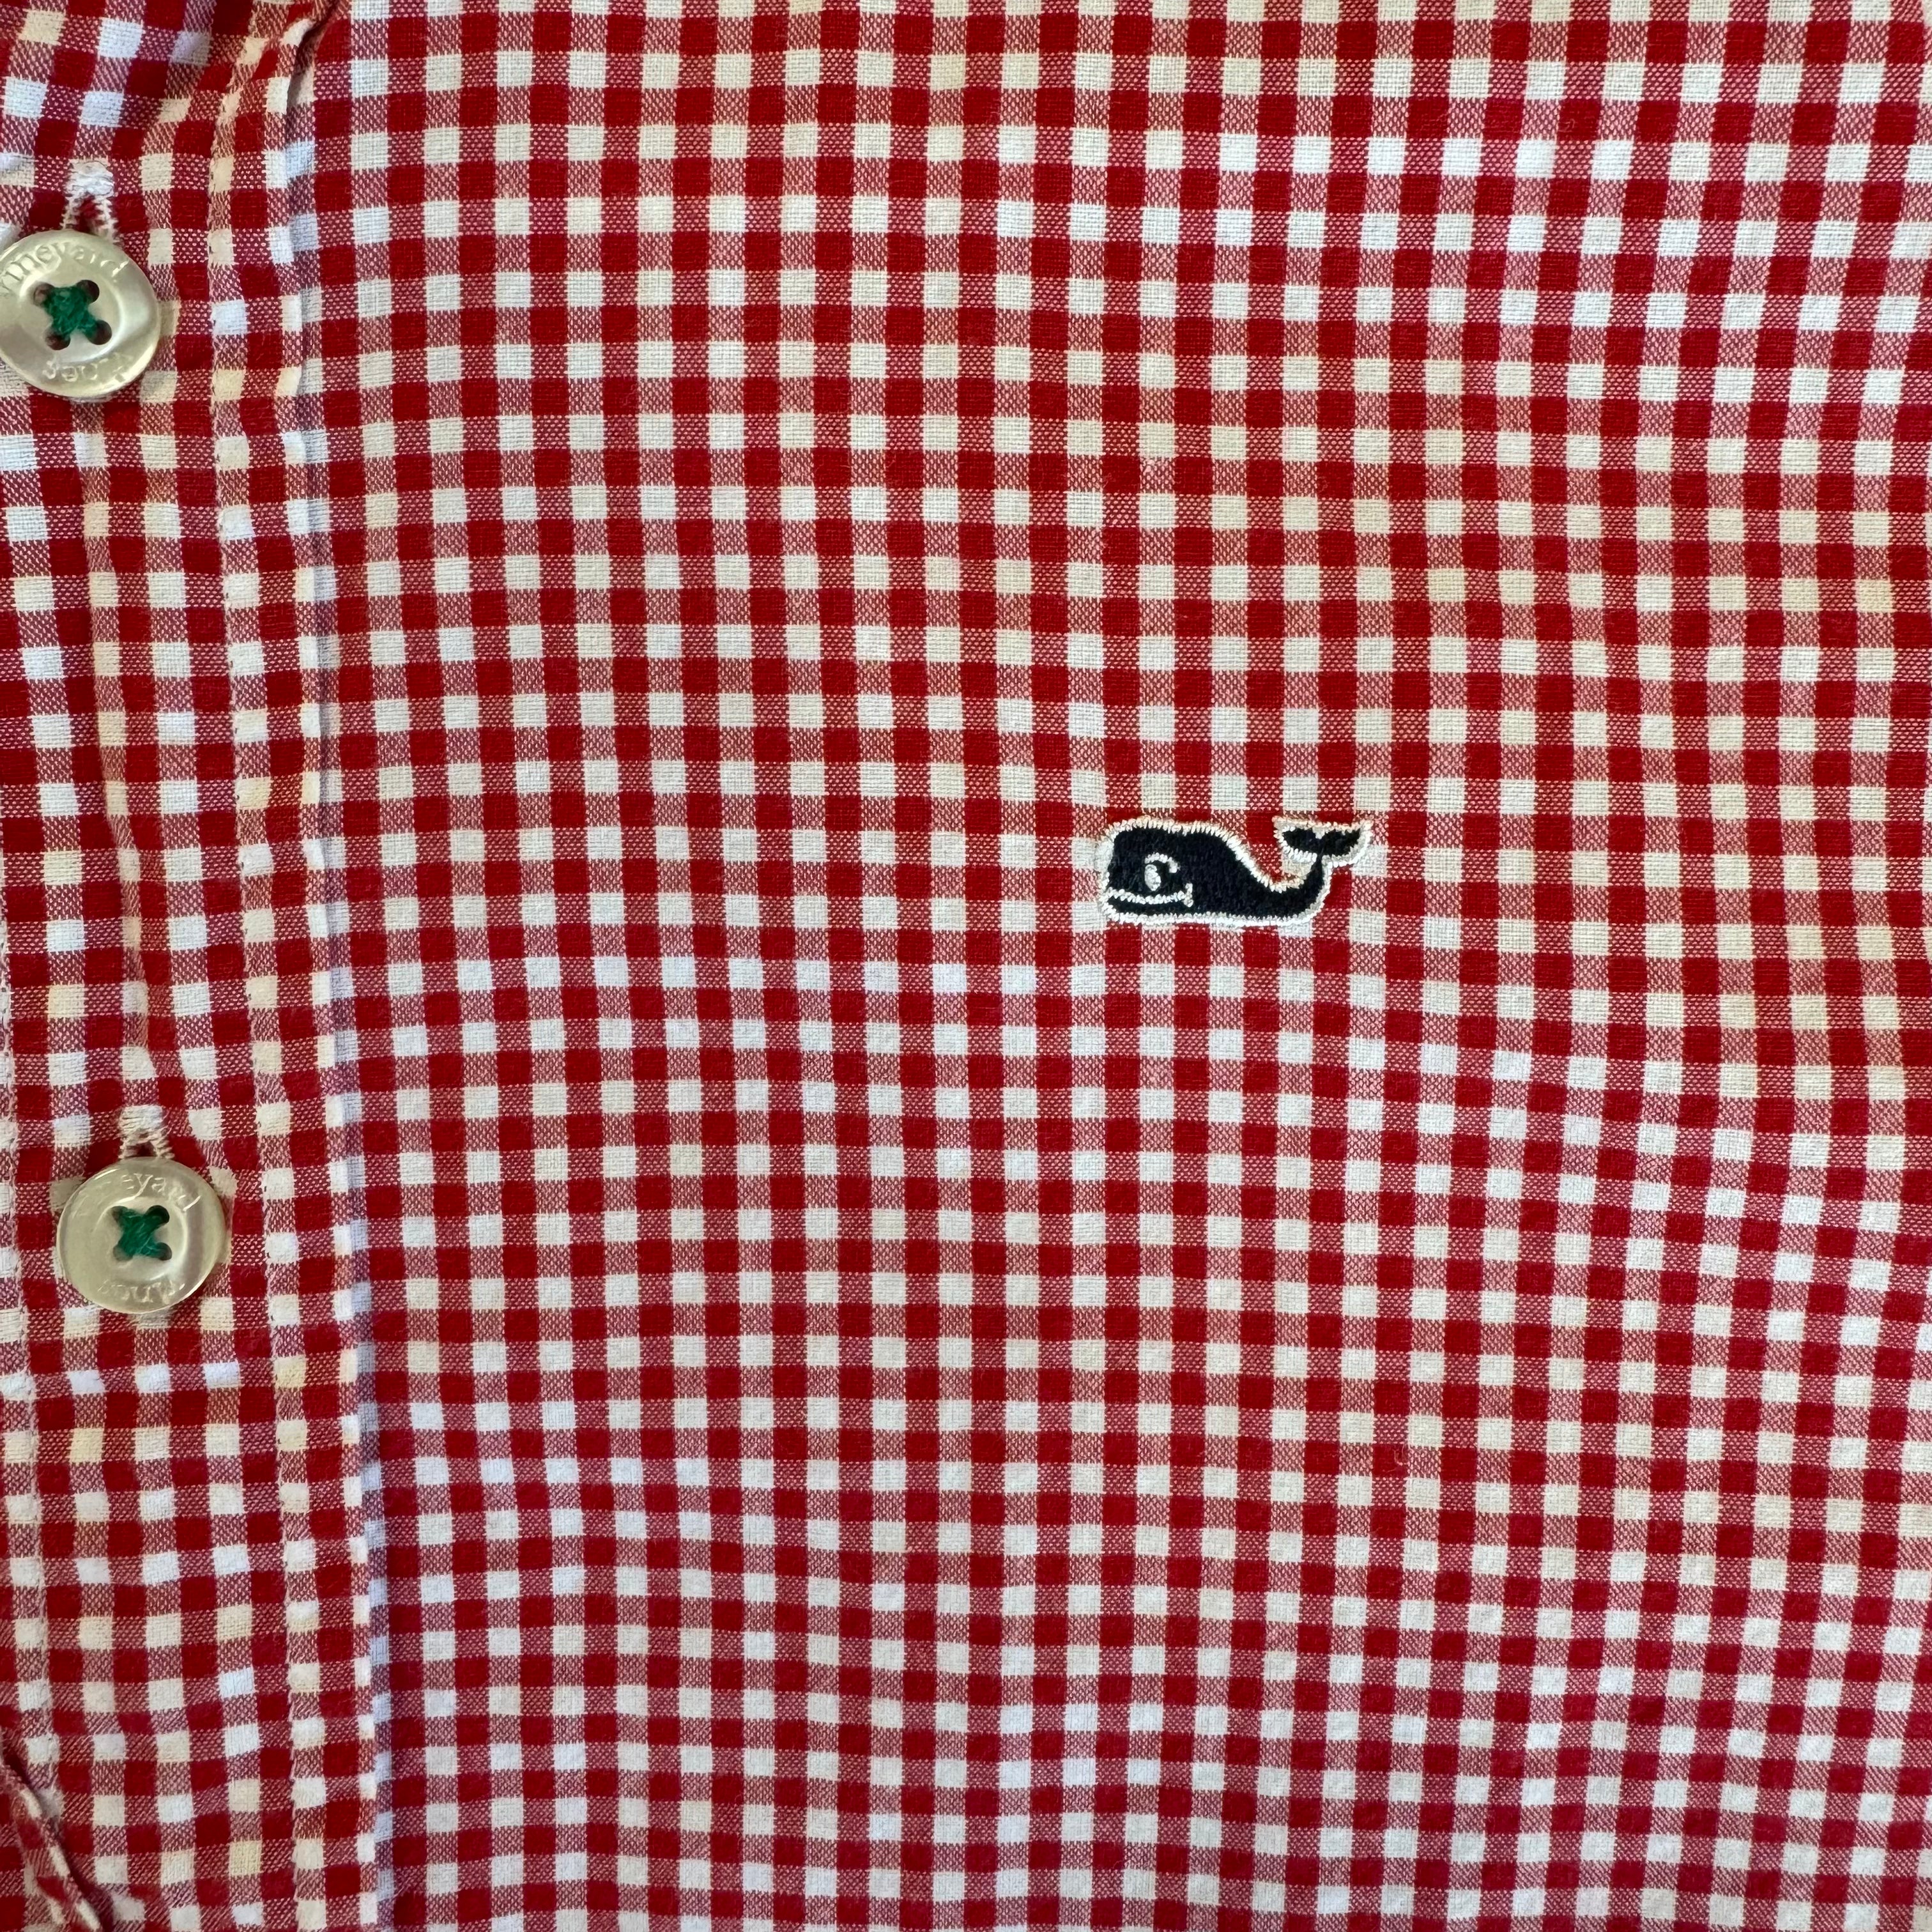 Vineyard Vines Button Down, Red Gingham Boys Size L(16)